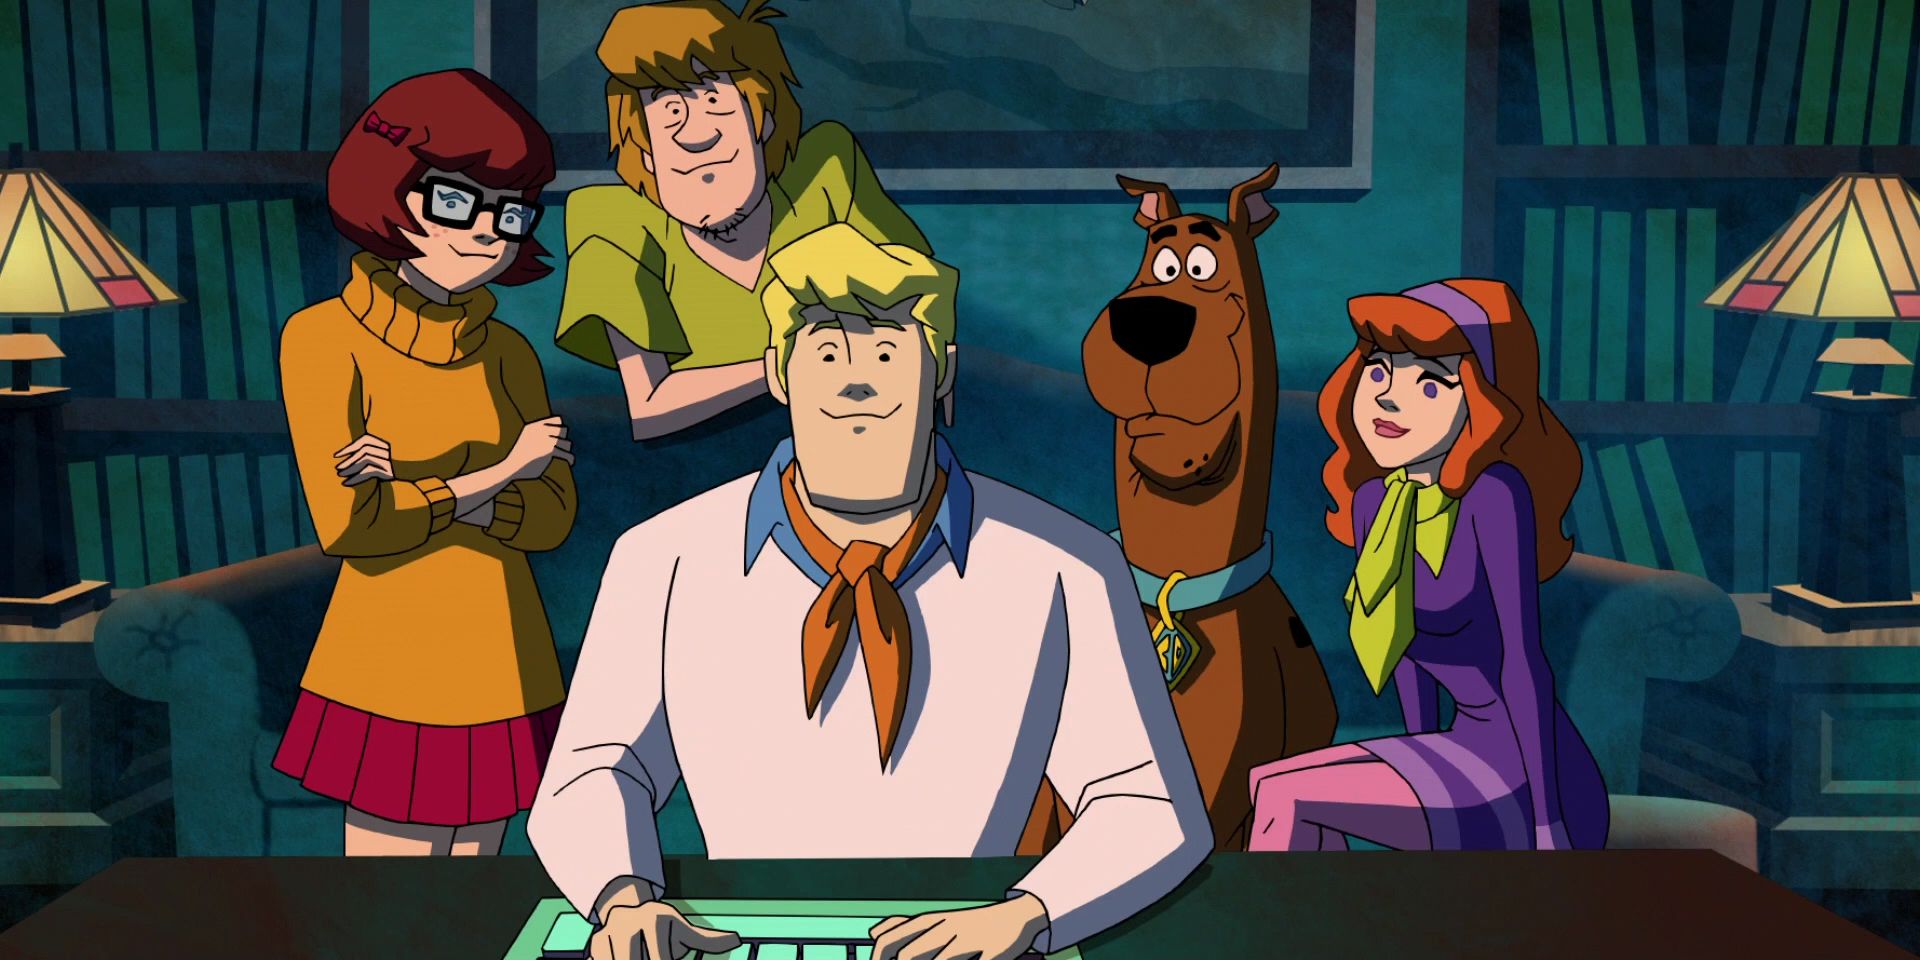 The Scooby-Doo characters sit in front of a keyboard